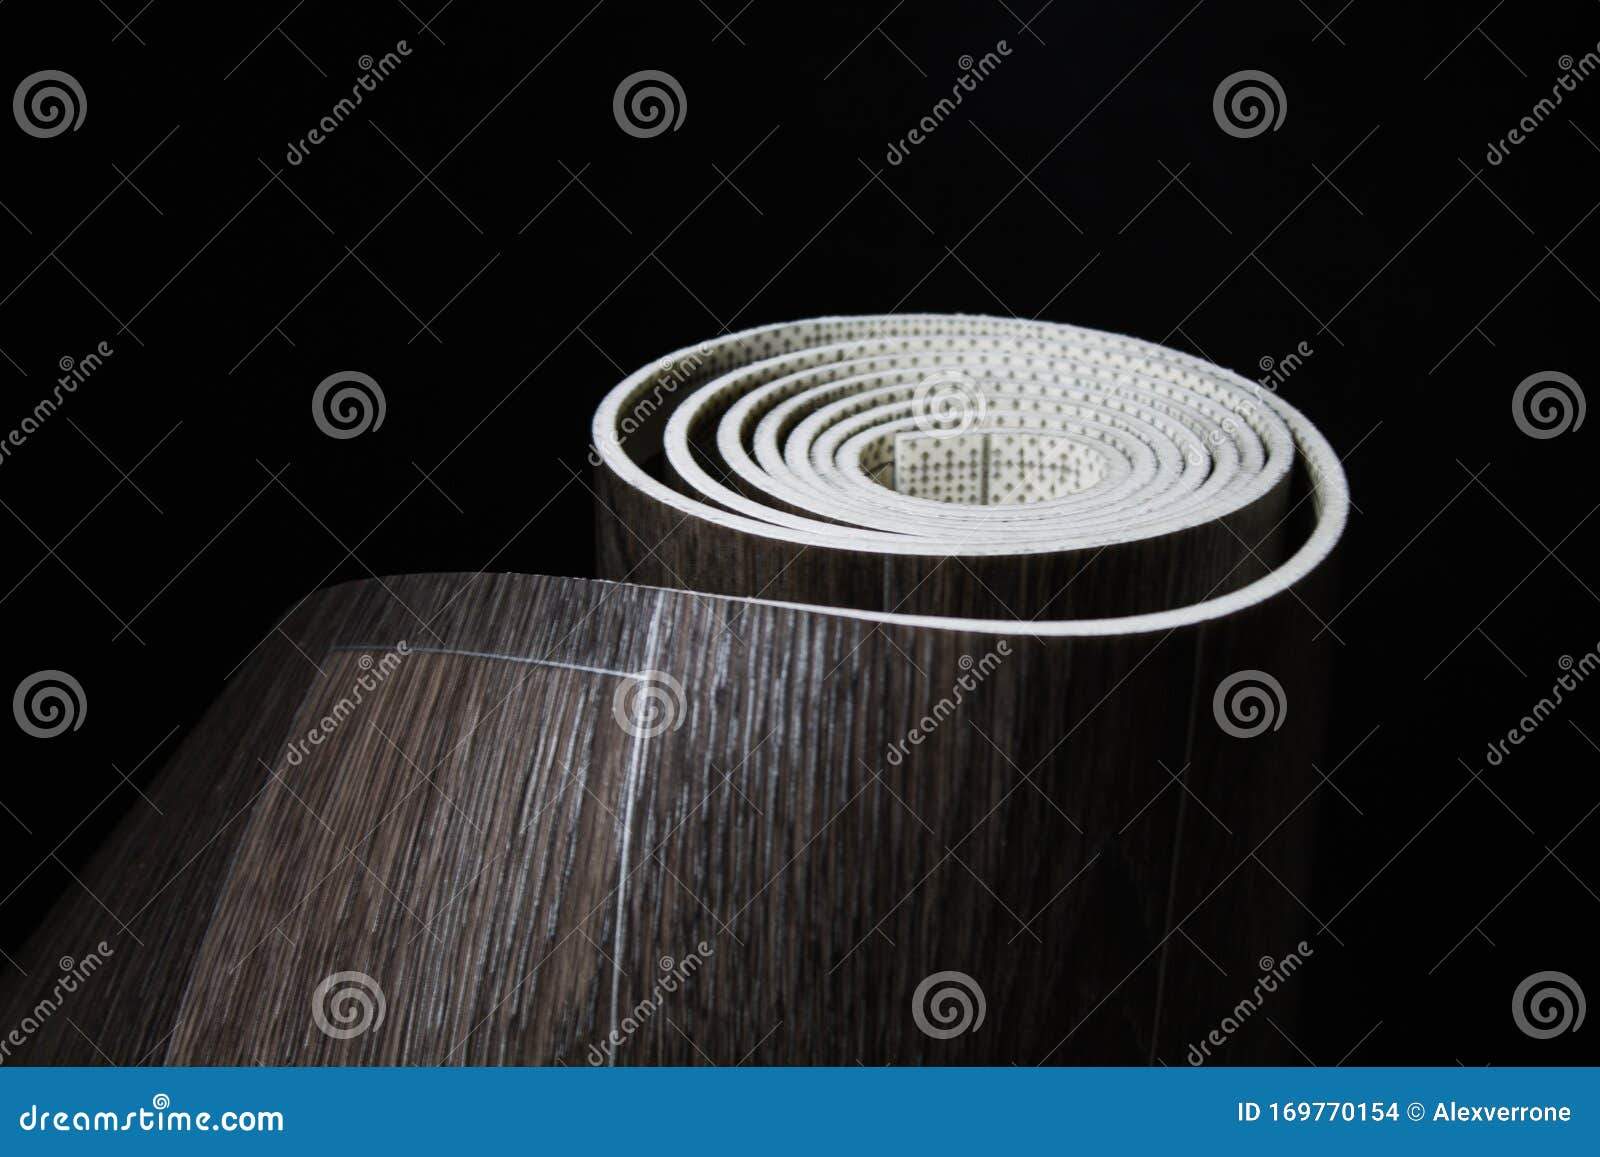 Black Linoleum Roll With Blackboard Texture And Price Tag Stock